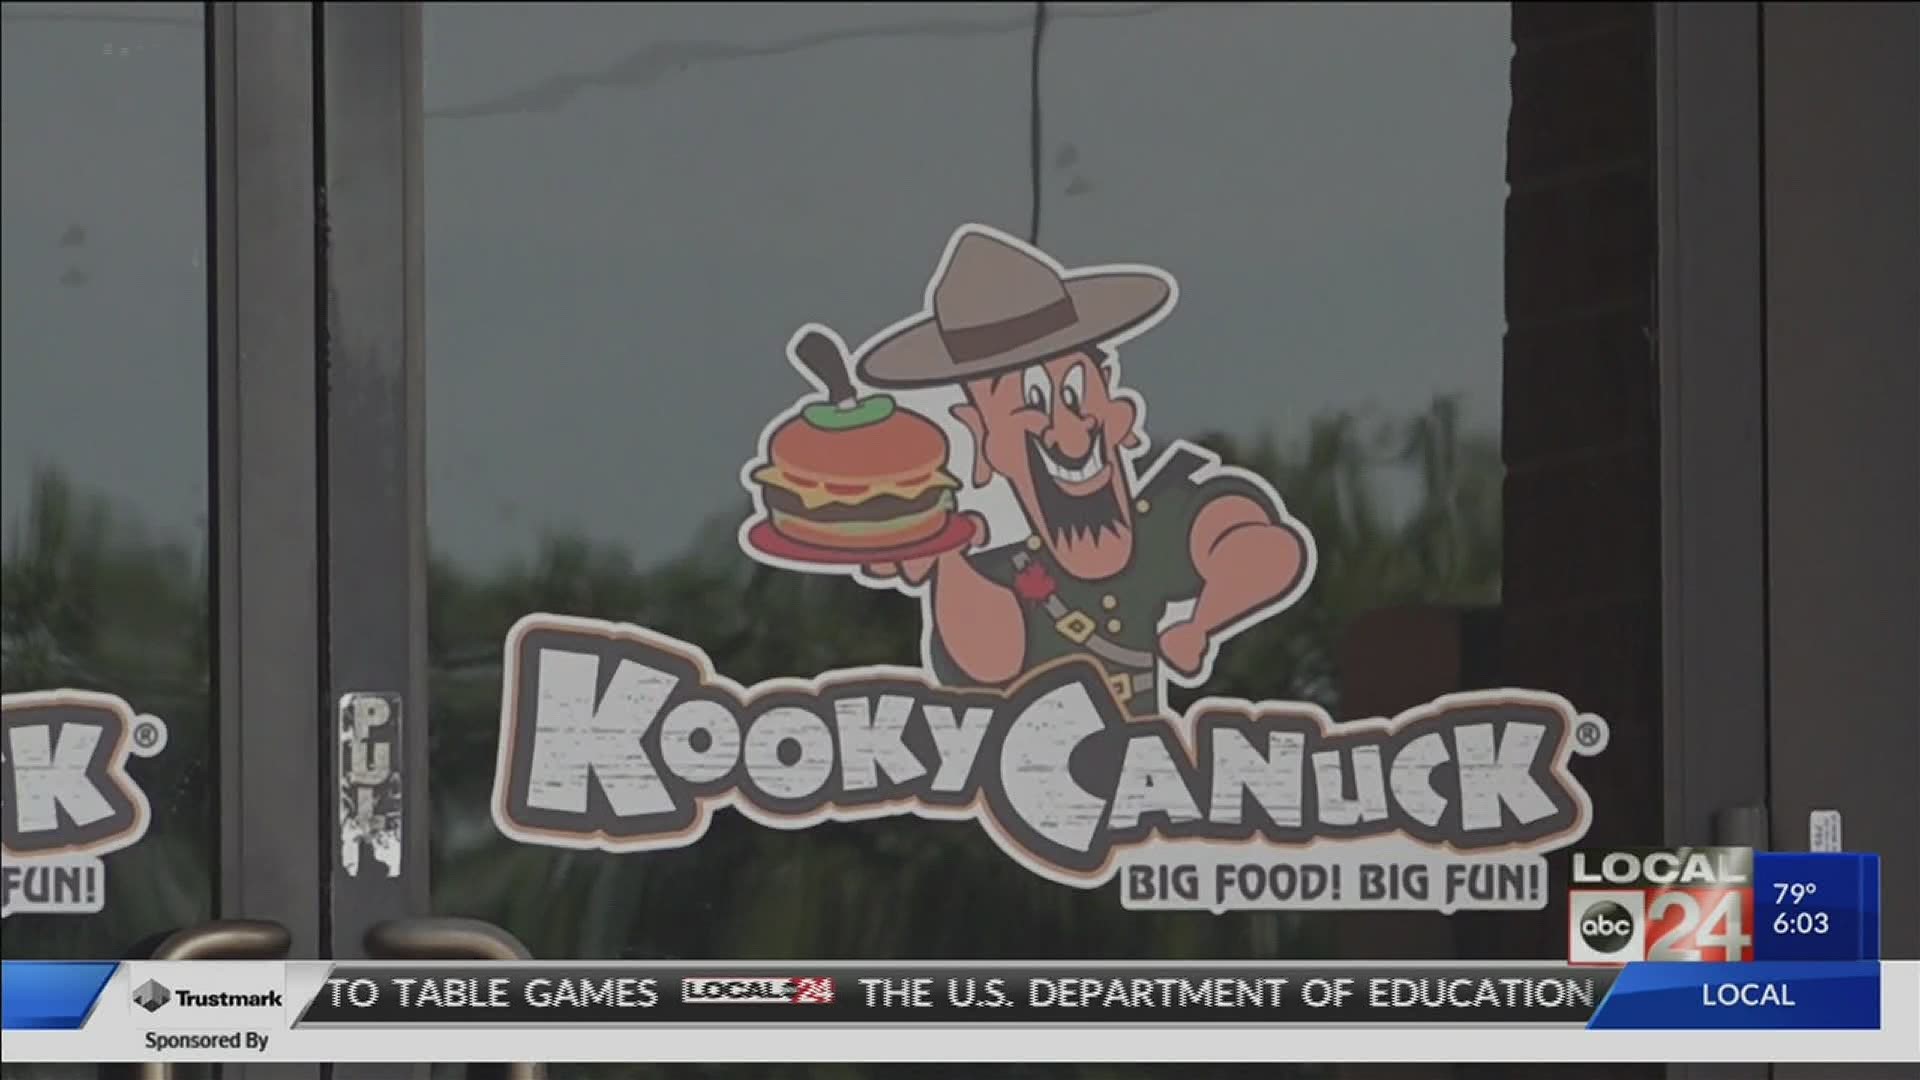 Kooky Canuck is one of many Memphis restaurants planning to reopen May 4